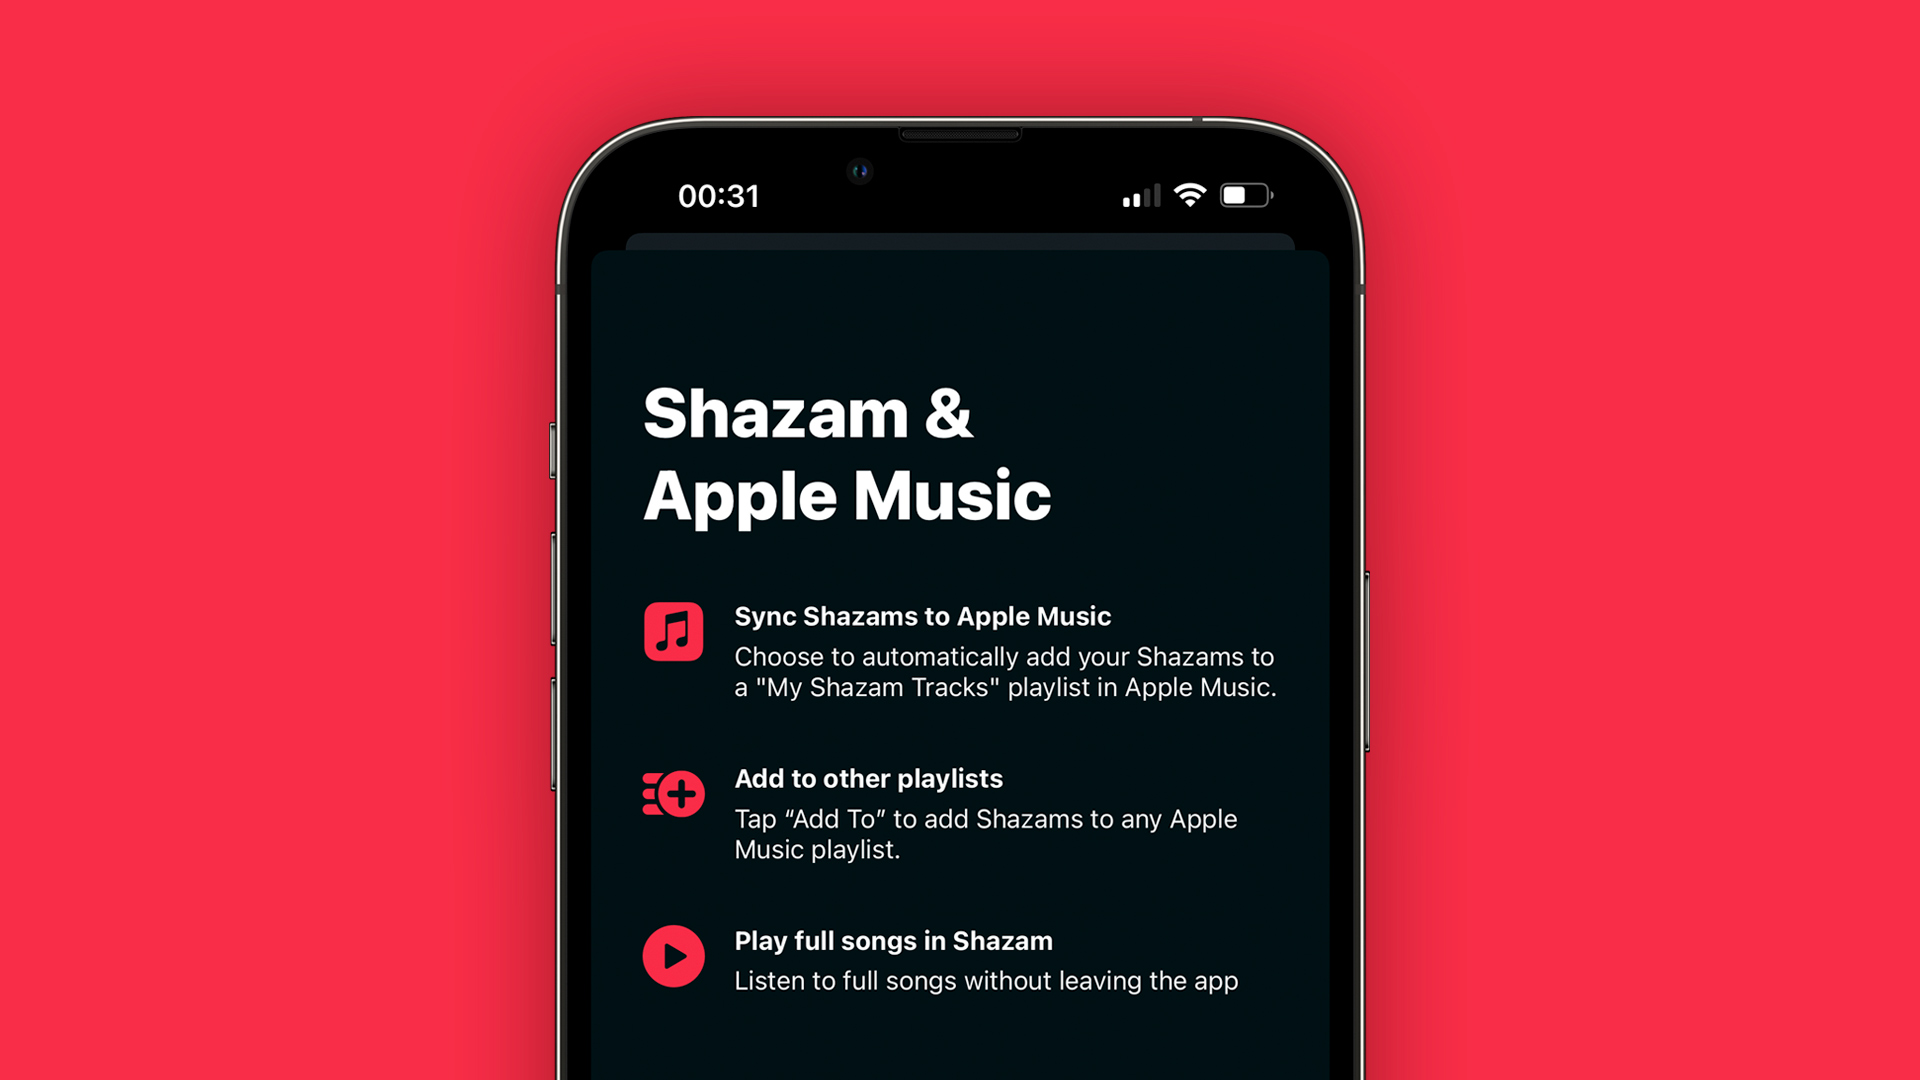 Shazam offering 5 months of Apple Music for free - 9to5Mac